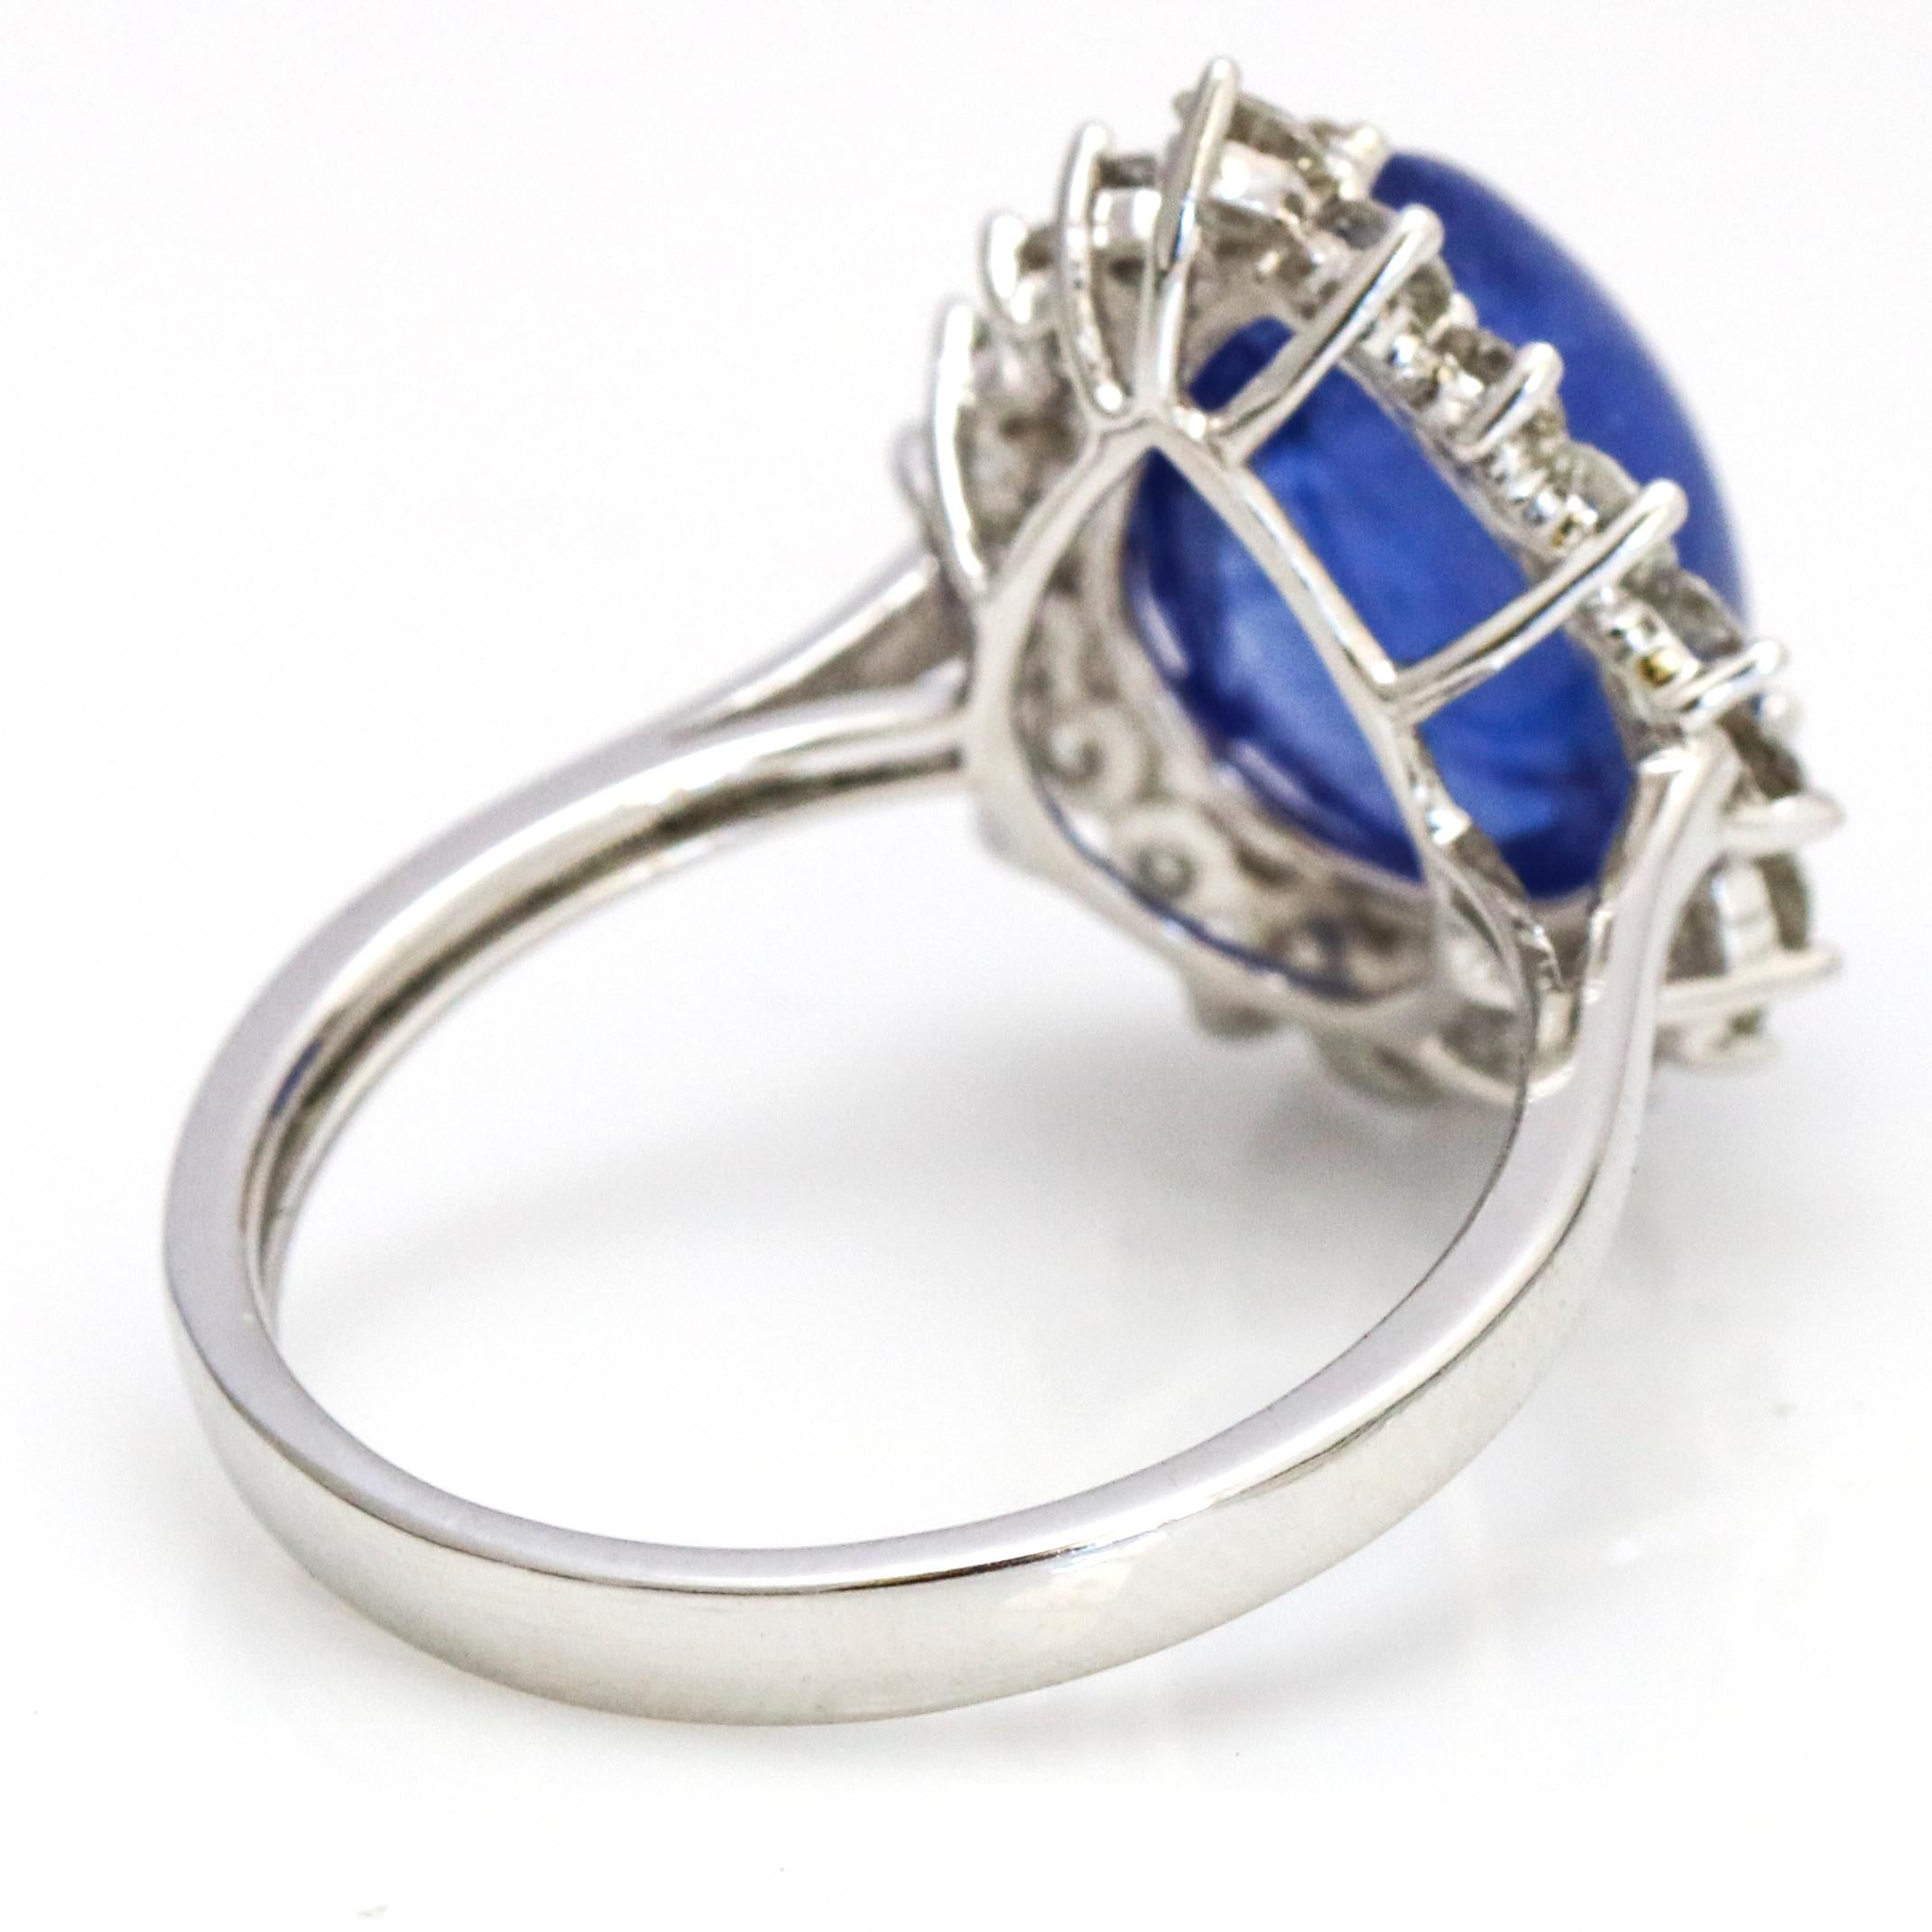 6.50 Carat 14 Karat White Gold Pear Cabochon Tanzanite Diamond Ring In Good Condition For Sale In Fort Lauderdale, FL